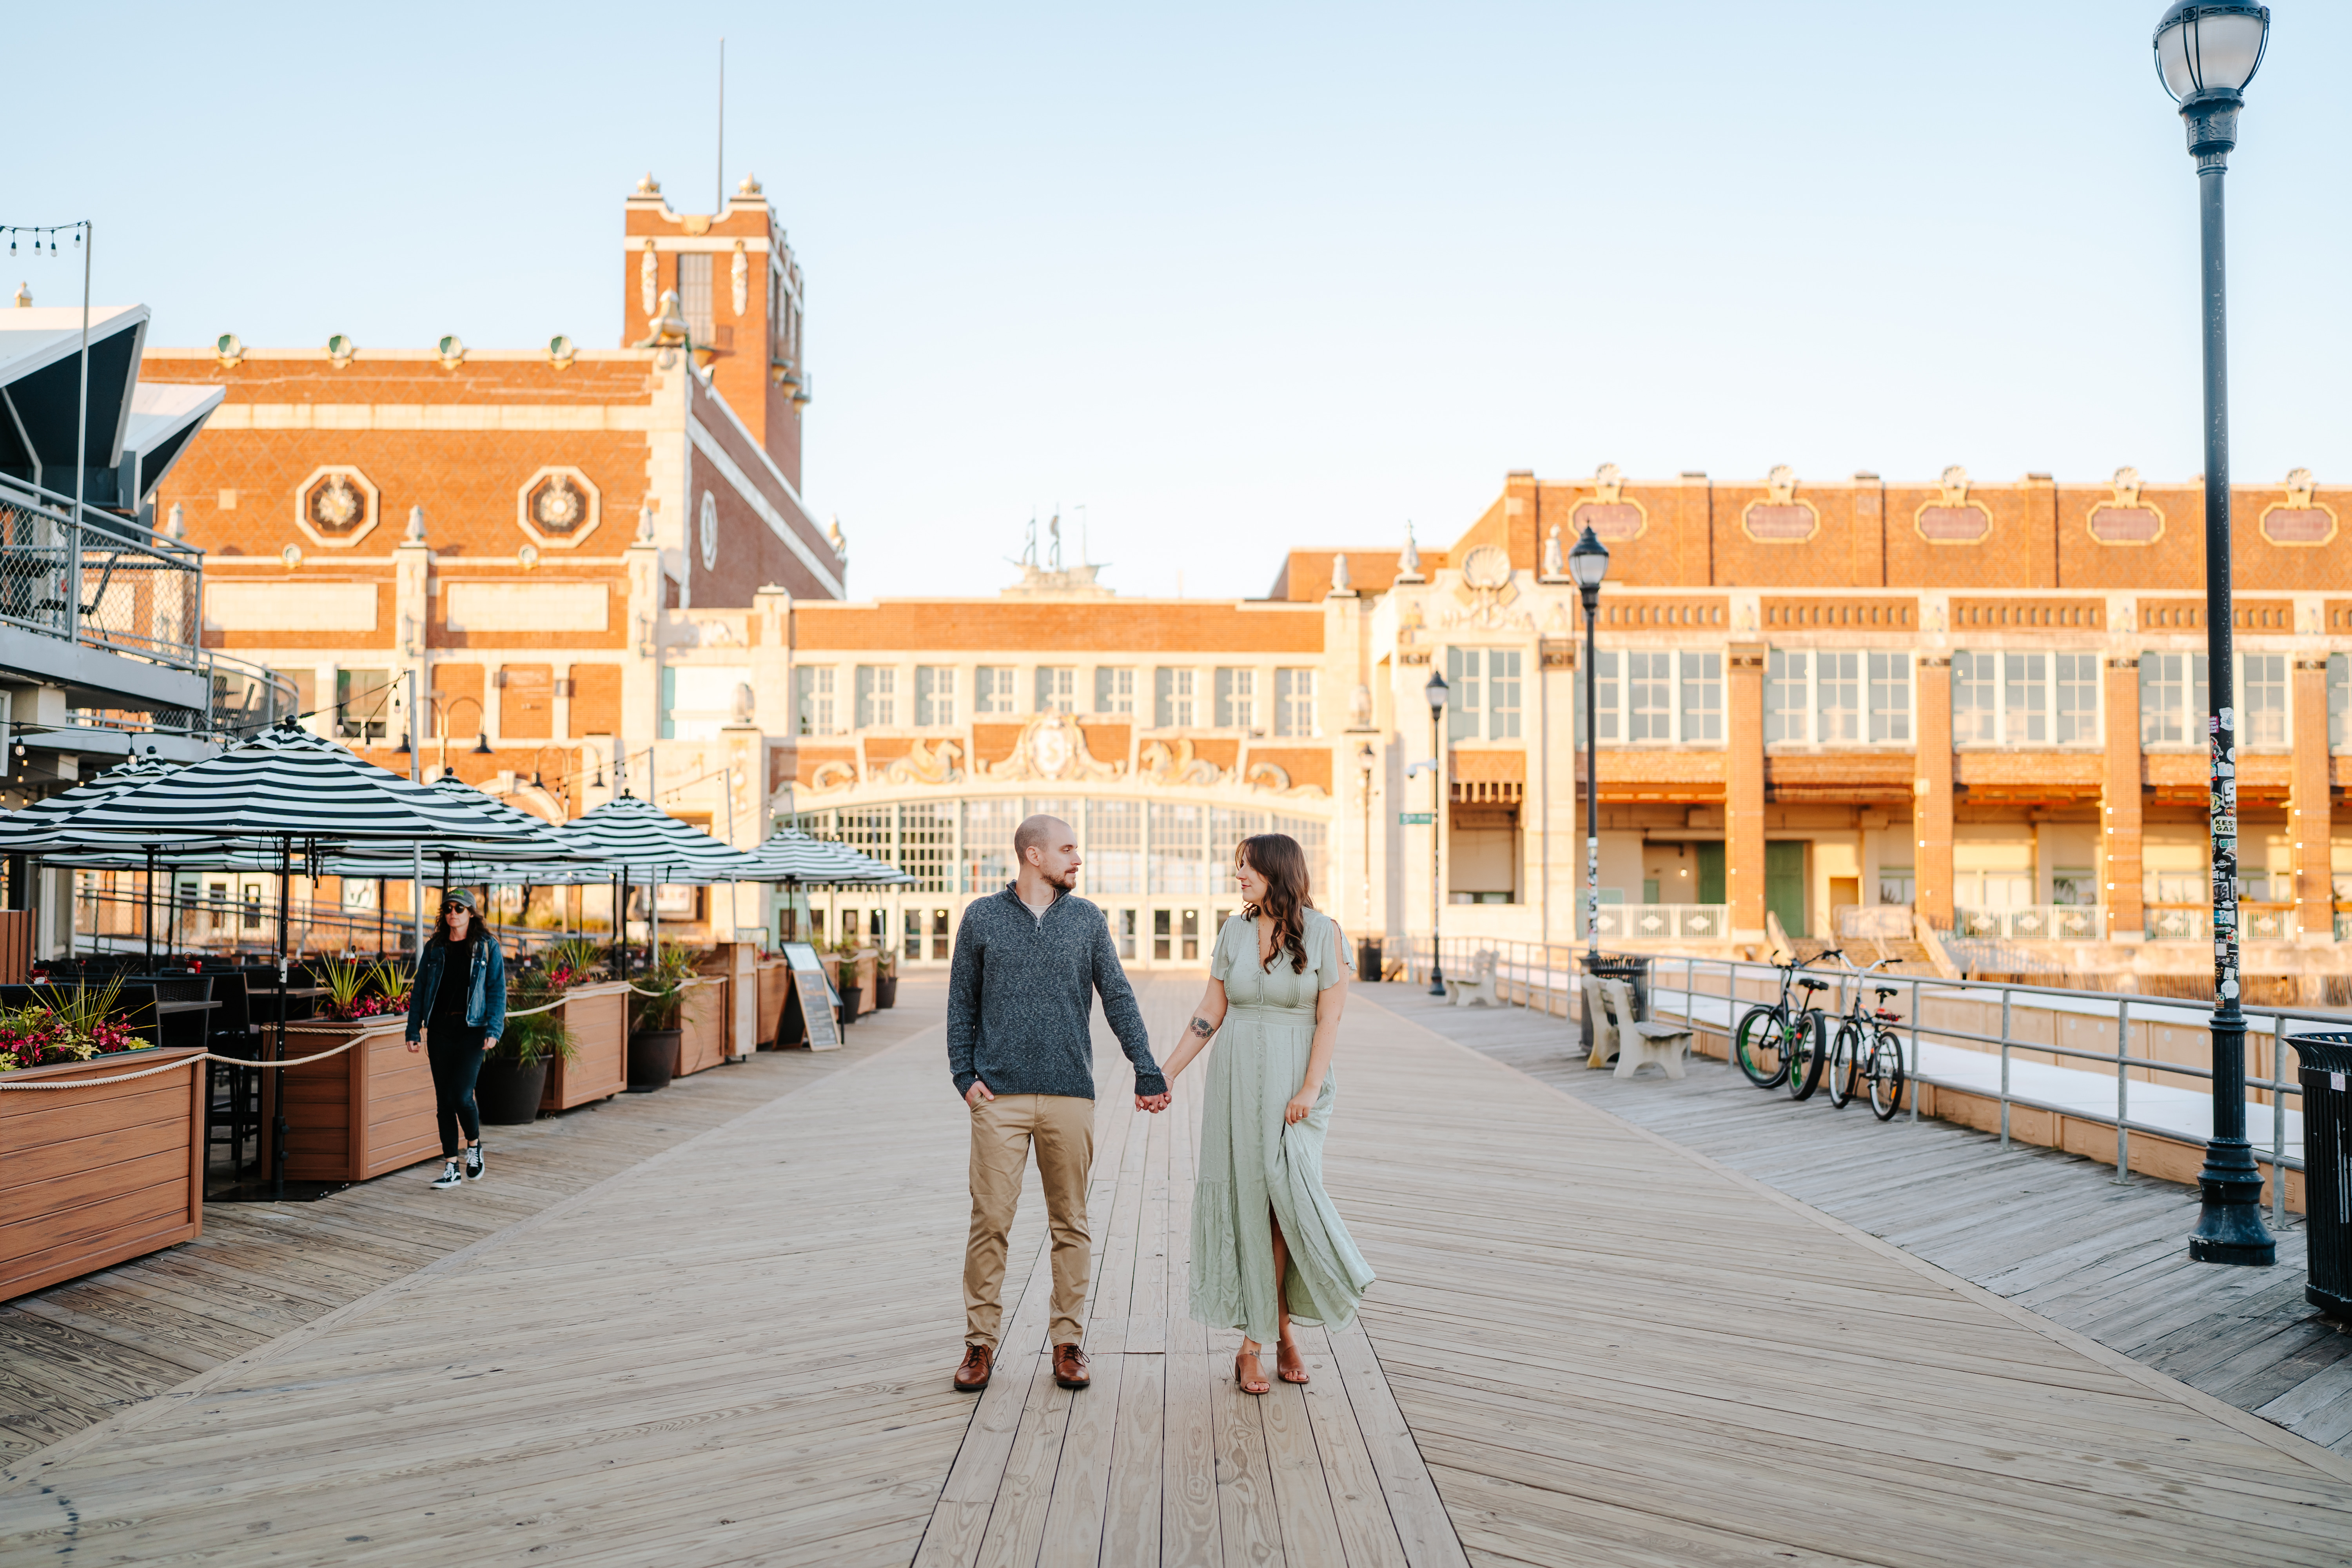 Couple embracing in a sun-kissed engagement photCouple embracing in a sun-kissed engagement photo on Asbury Park Boardwalk, captured by Maryland Wedding Photographer, showcasing candid love and joyful momentso on Asbury Park Boardwalk, captured by Maryland Wedding Photographer, showcasing candid love and joyful moments